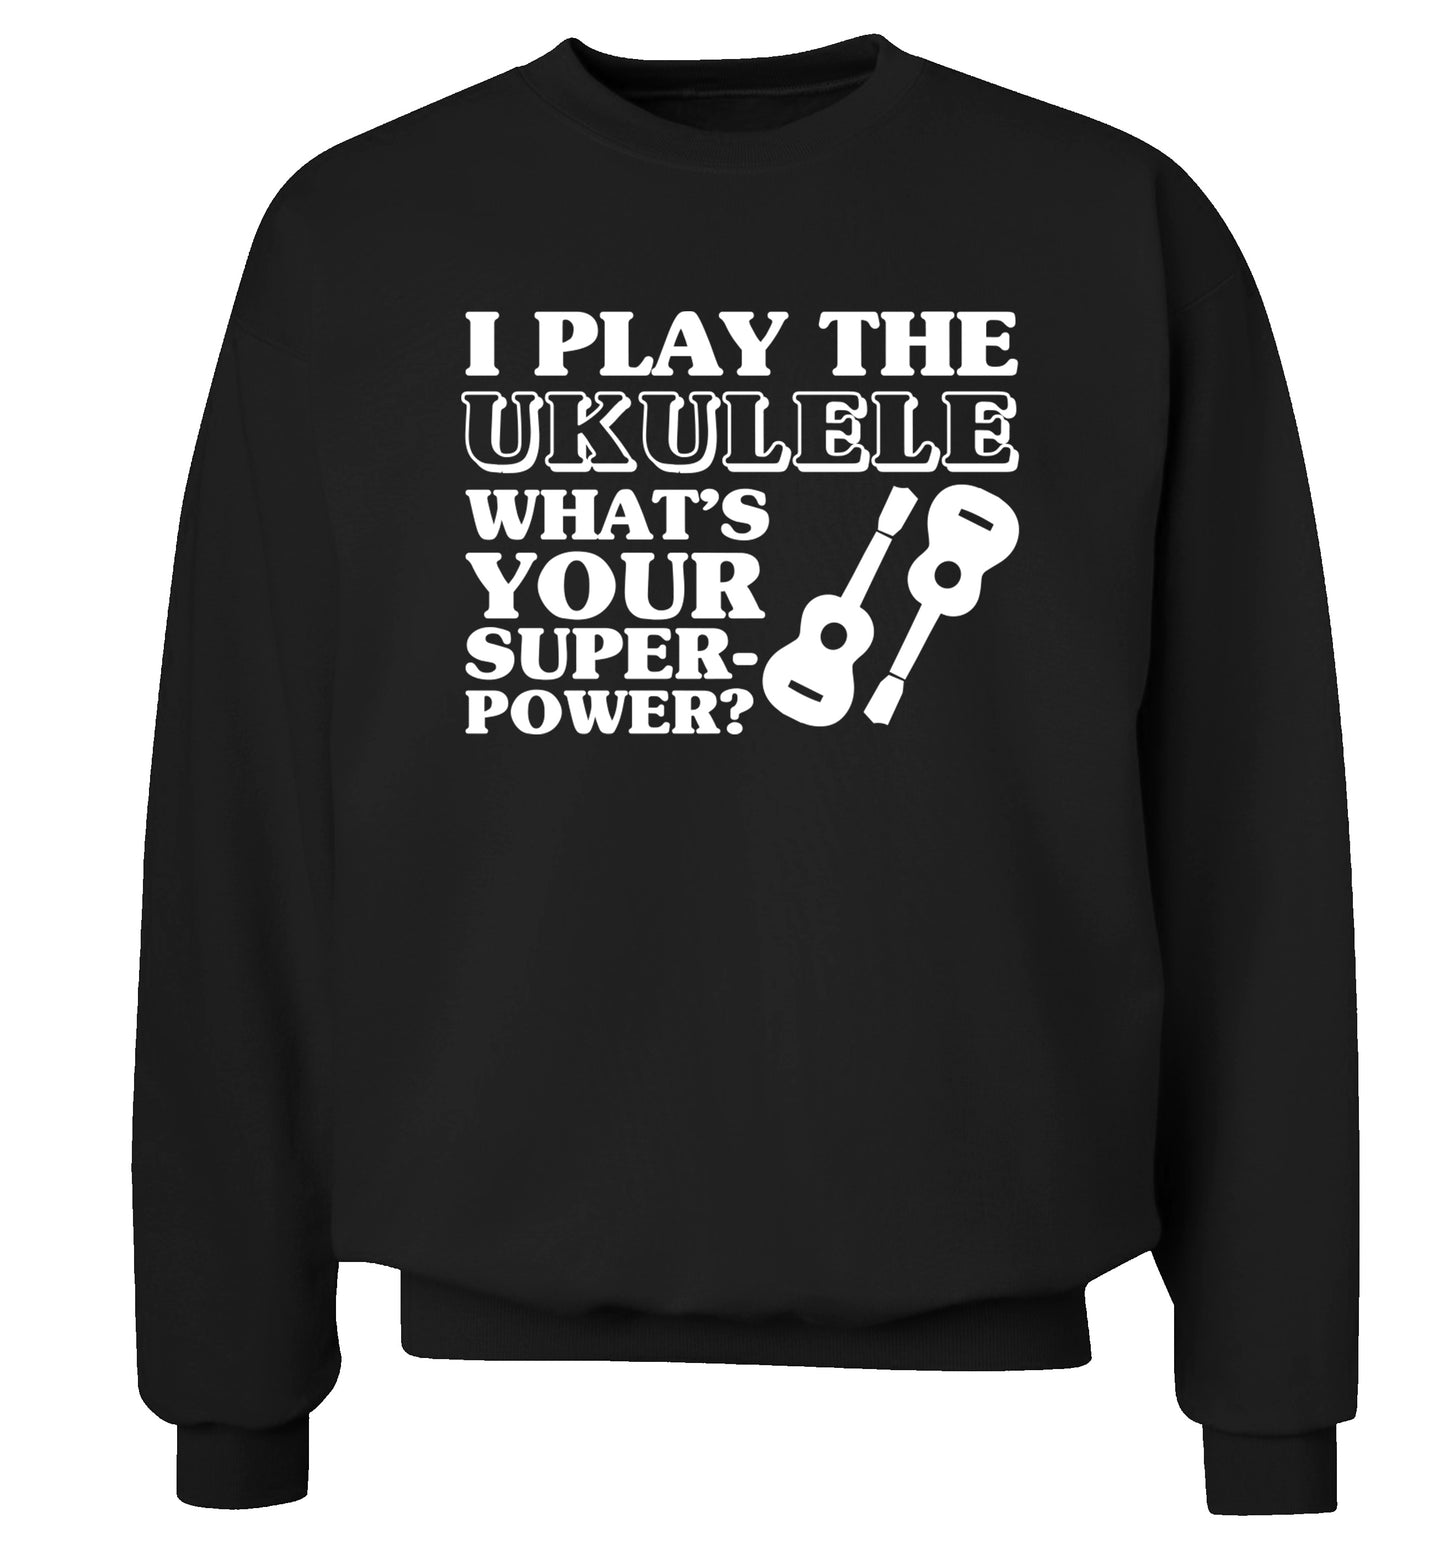 I play the ukulele what's your superpower? Adult's unisex black Sweater 2XL